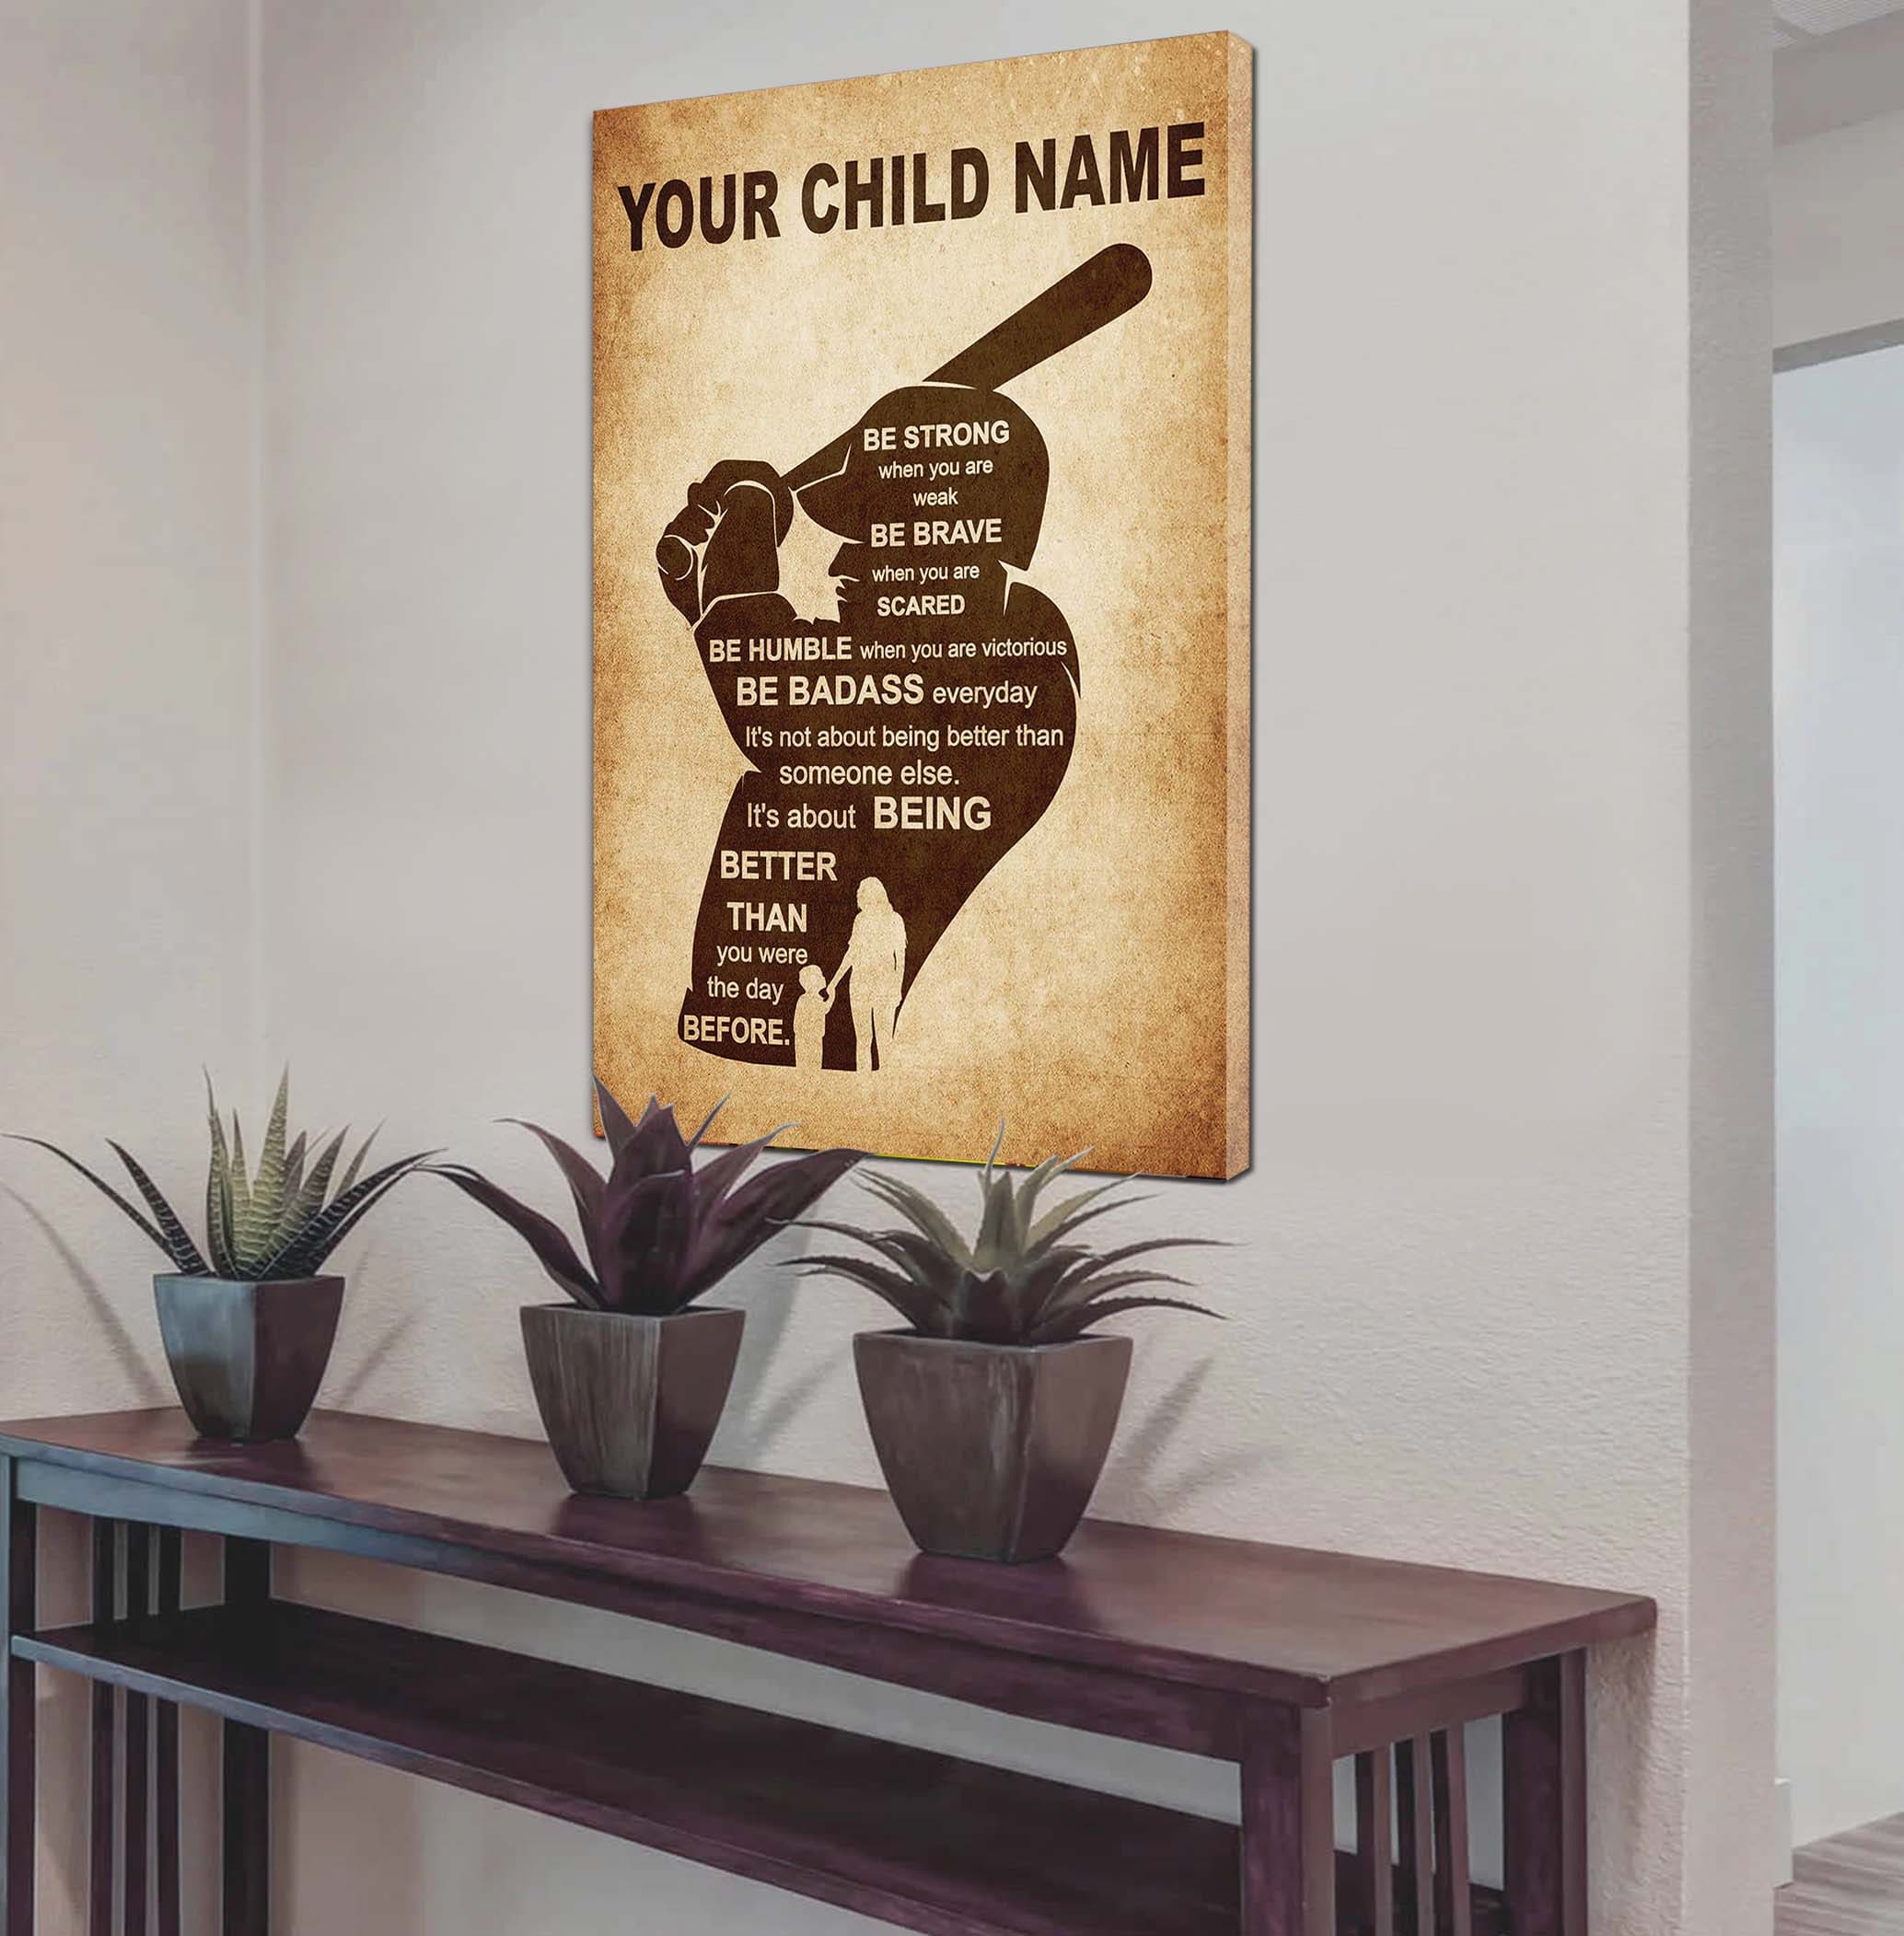 Personalized Your Child Name From Mom To Son Basketball Poster Canvas It's Not About Being Better Than Someone Else It's About Being Better Than You Were The Day Before